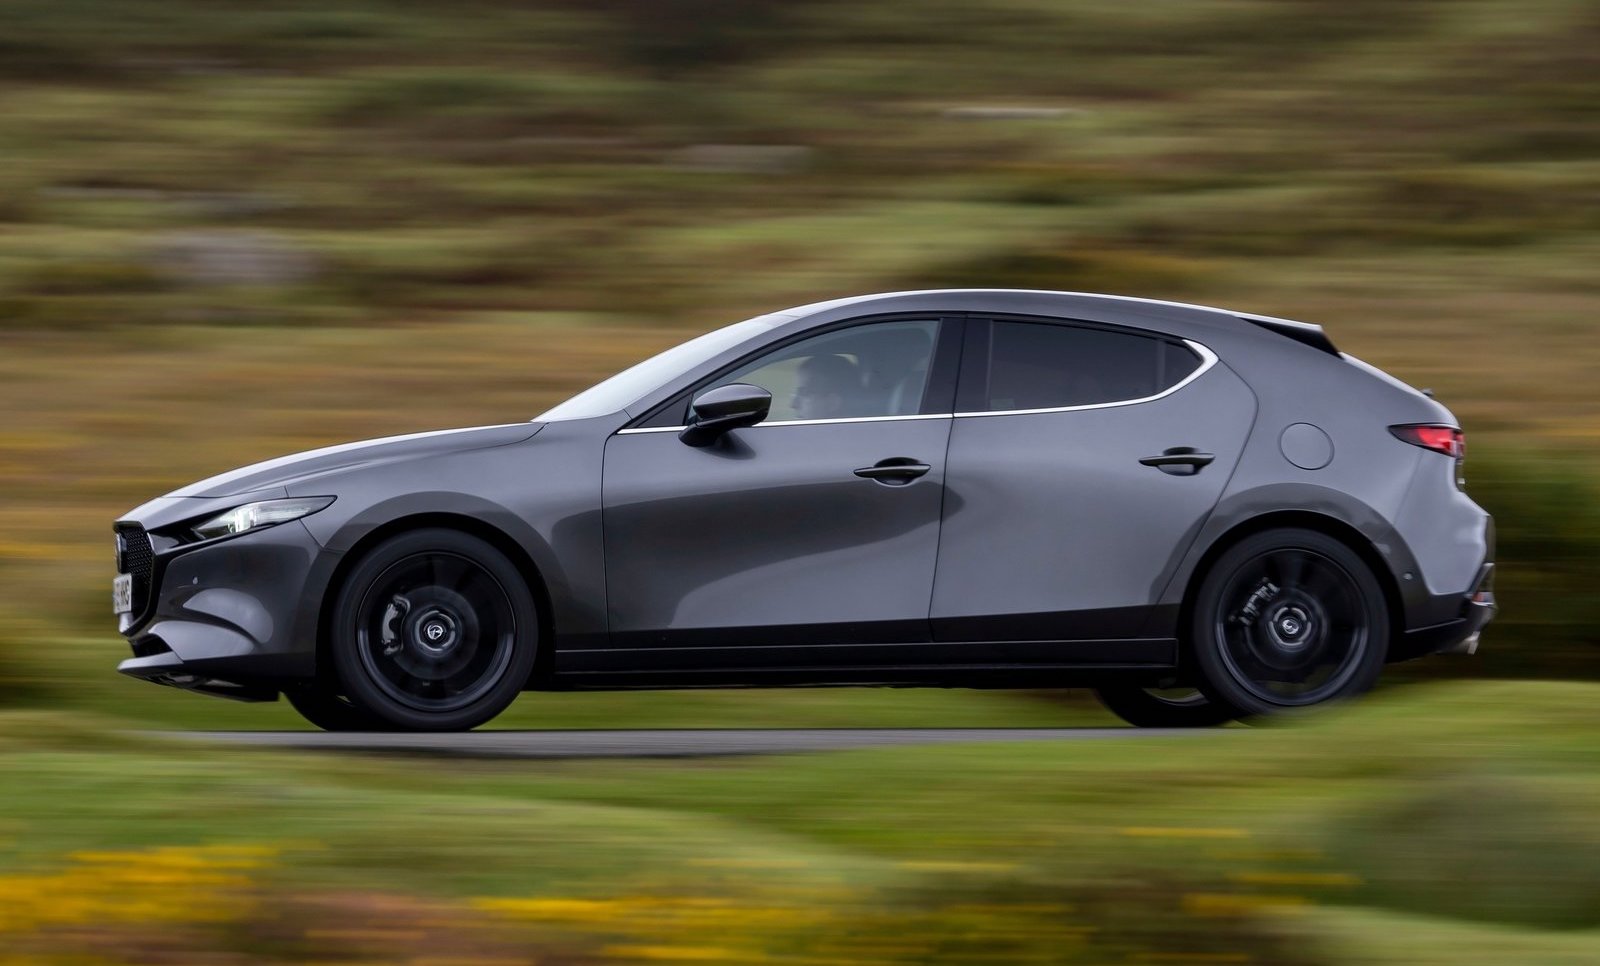 2021 Mazda 3 Hatch Release Date and Concept